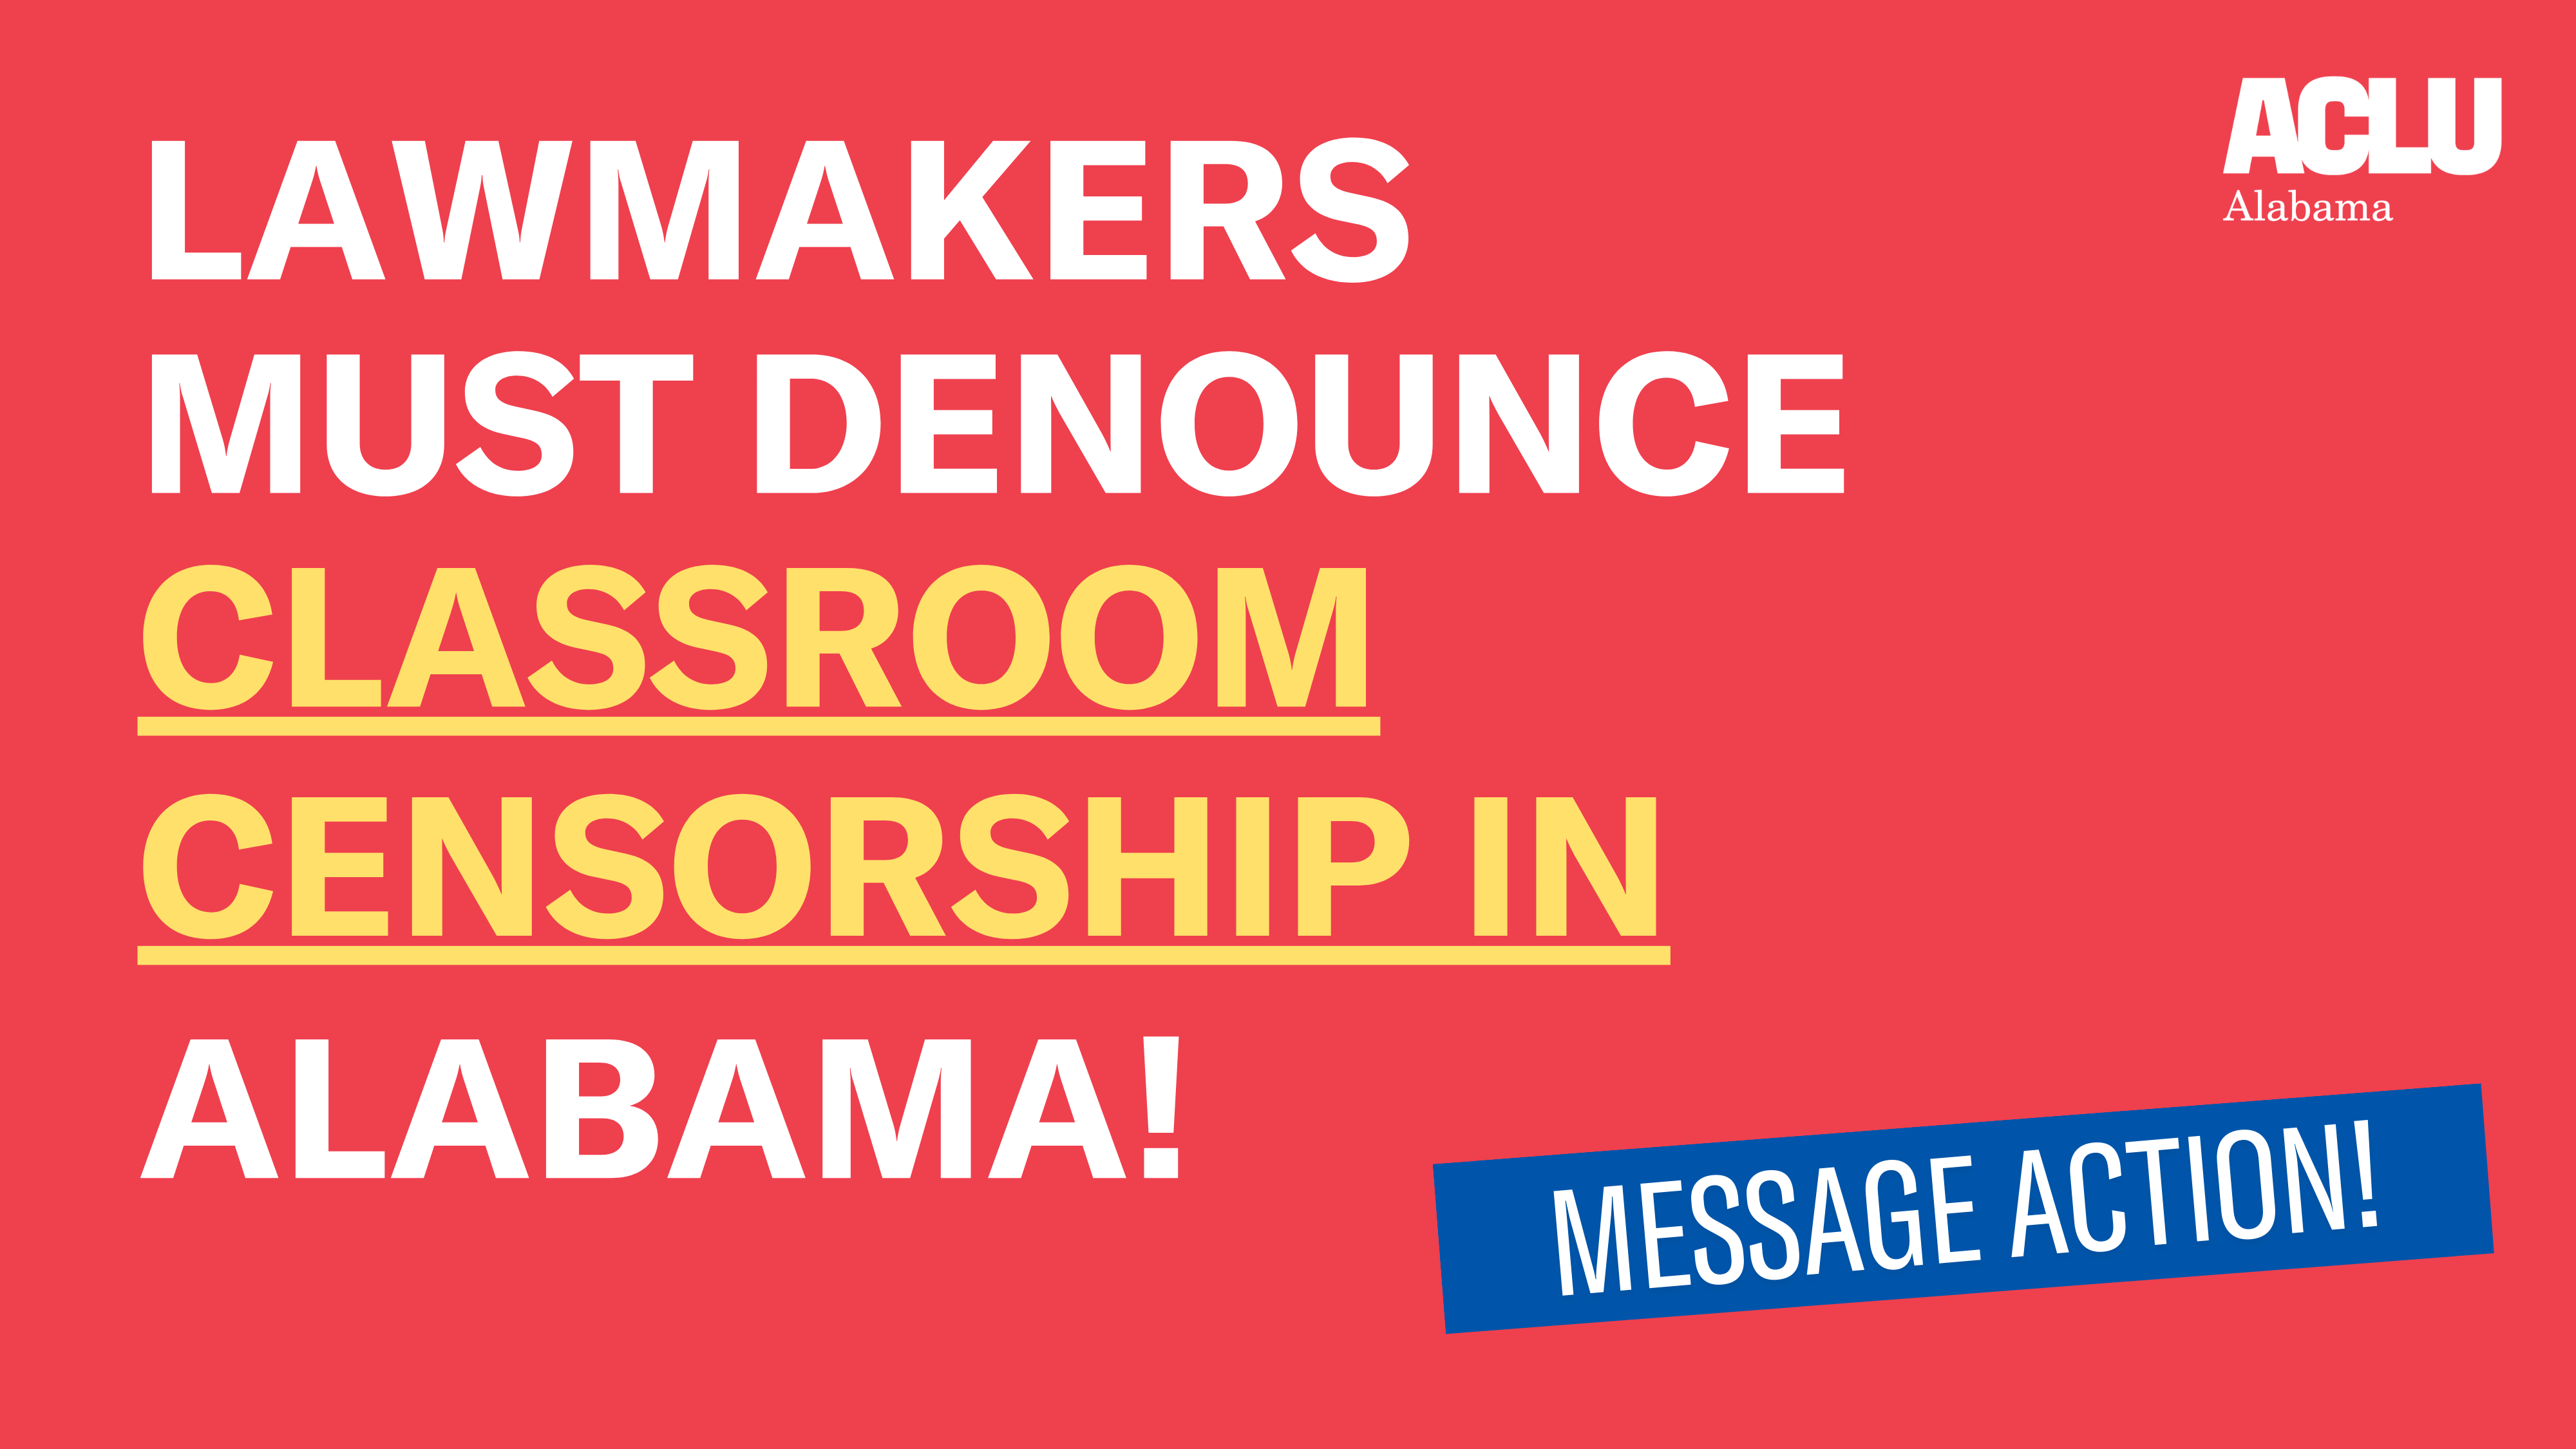 Call on lawmakers to denounce classroom censorship in Alabama!